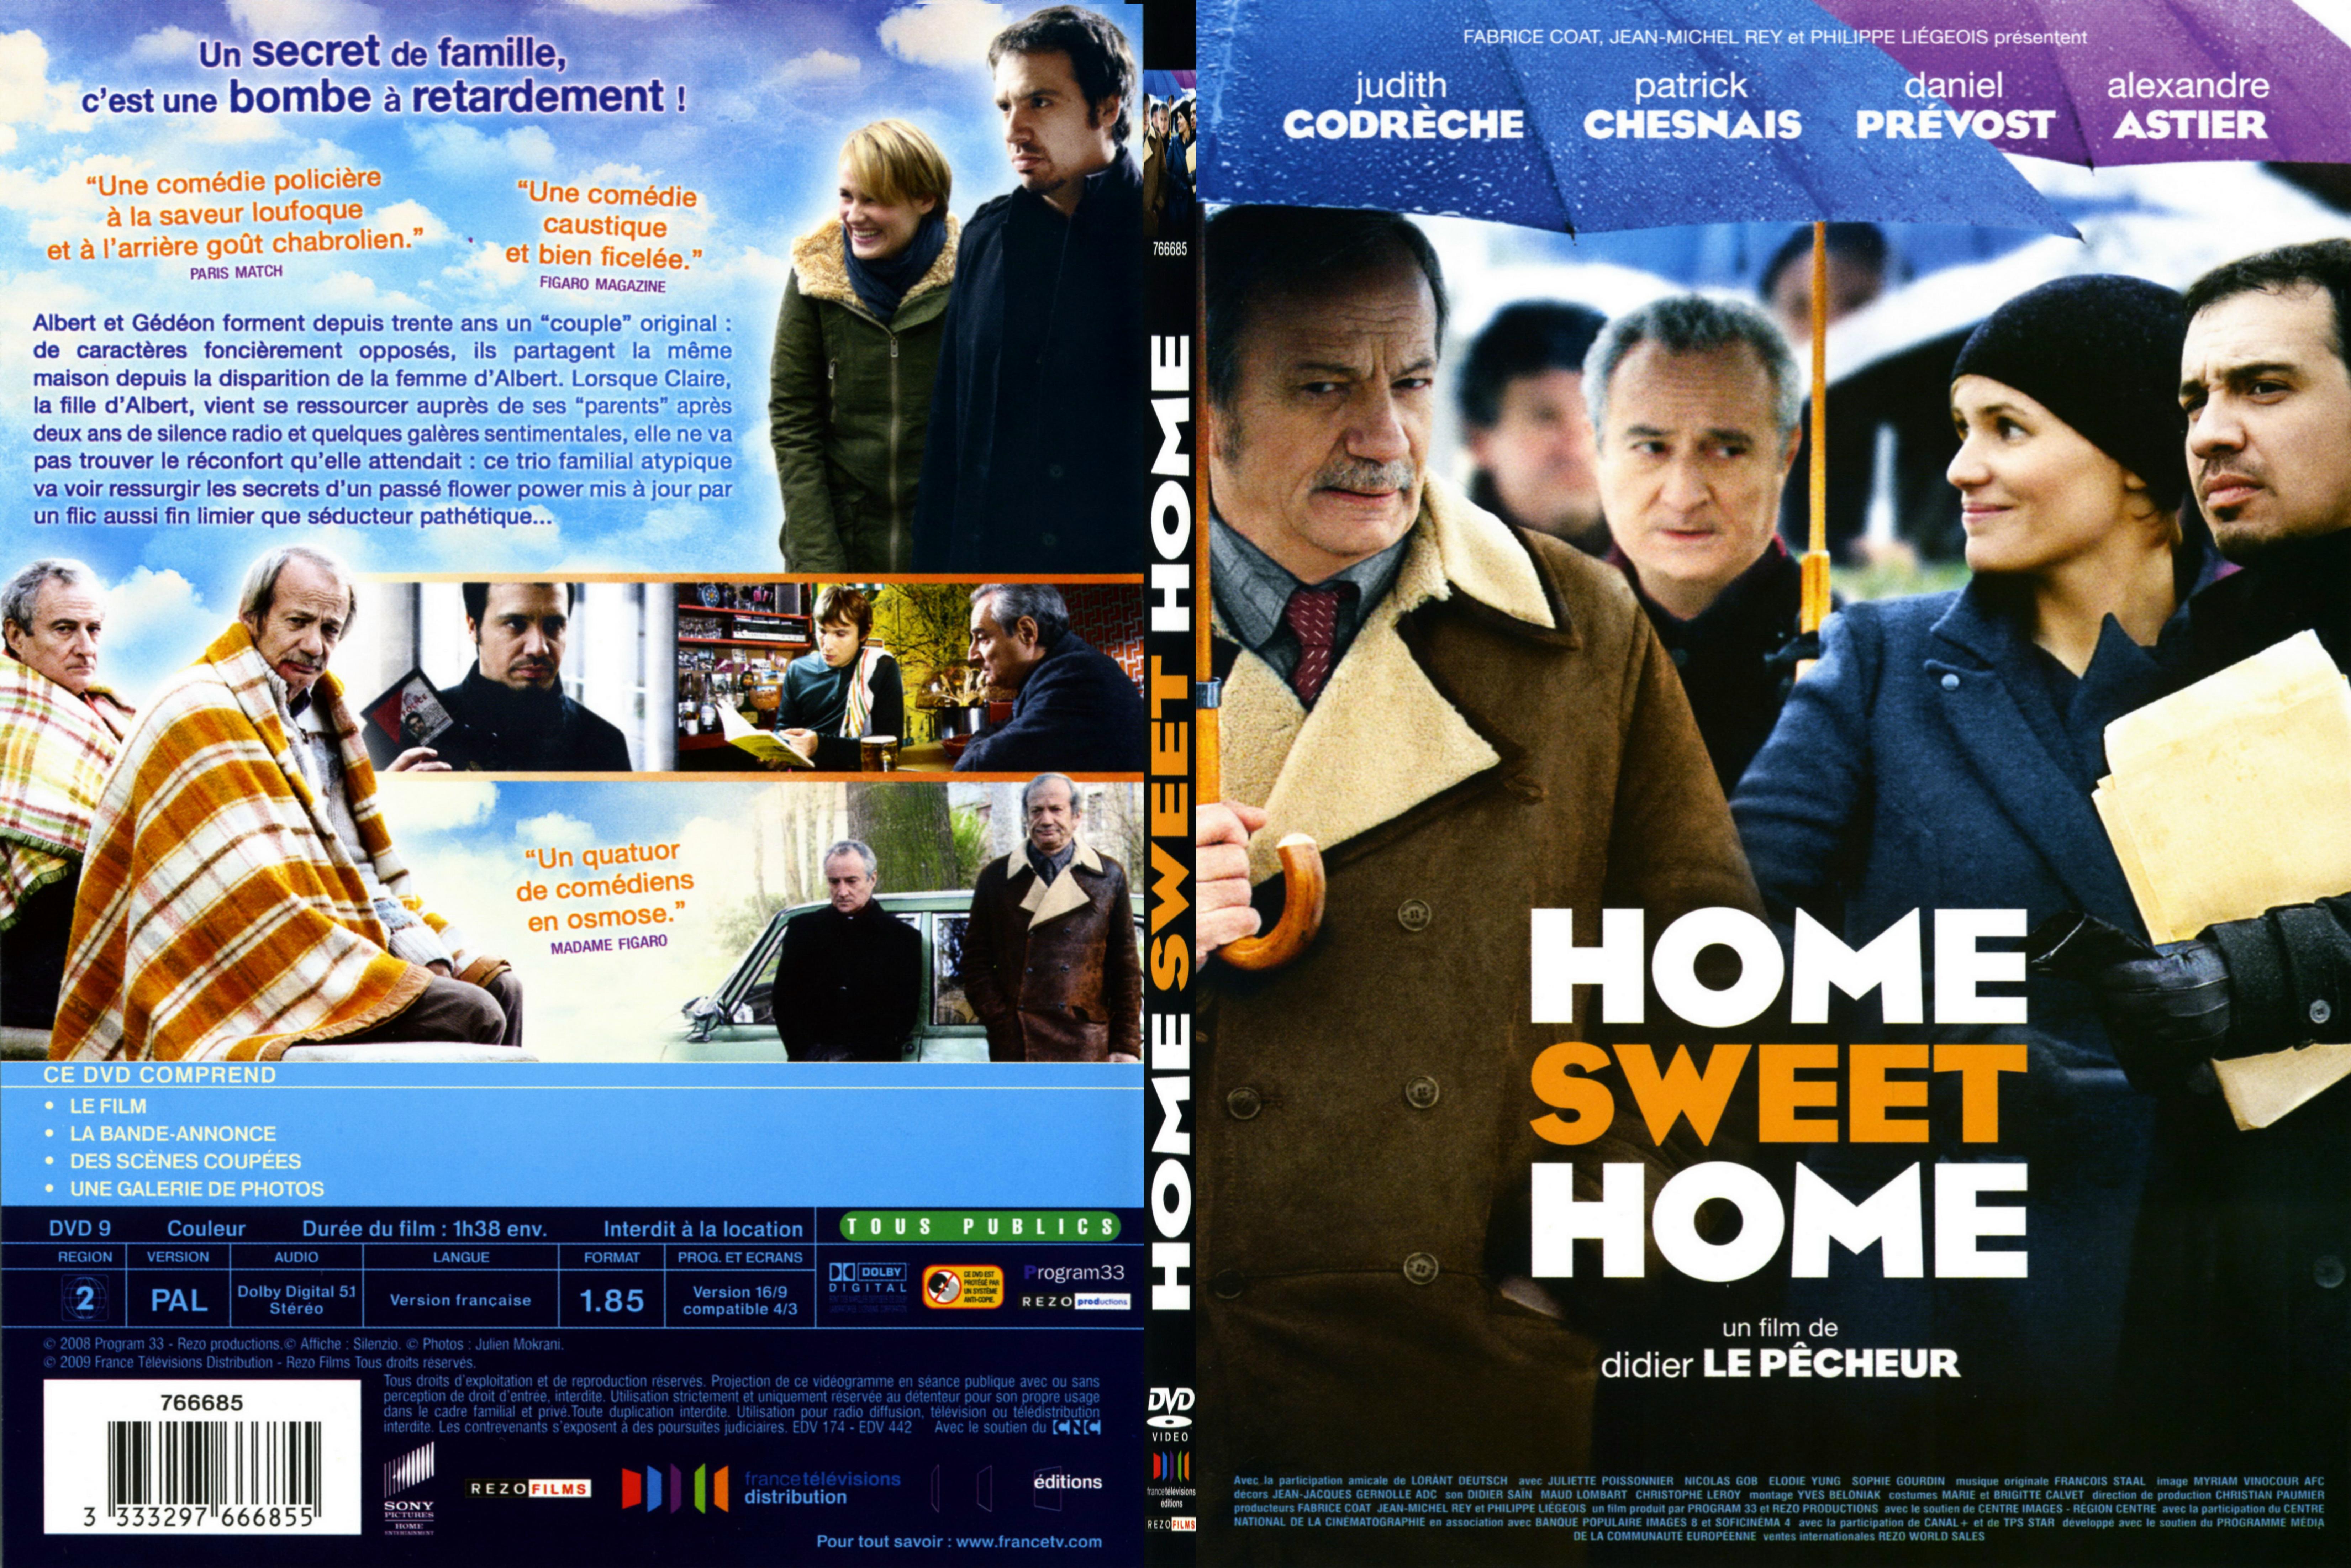 Jaquette DVD Home sweet home - SLIM